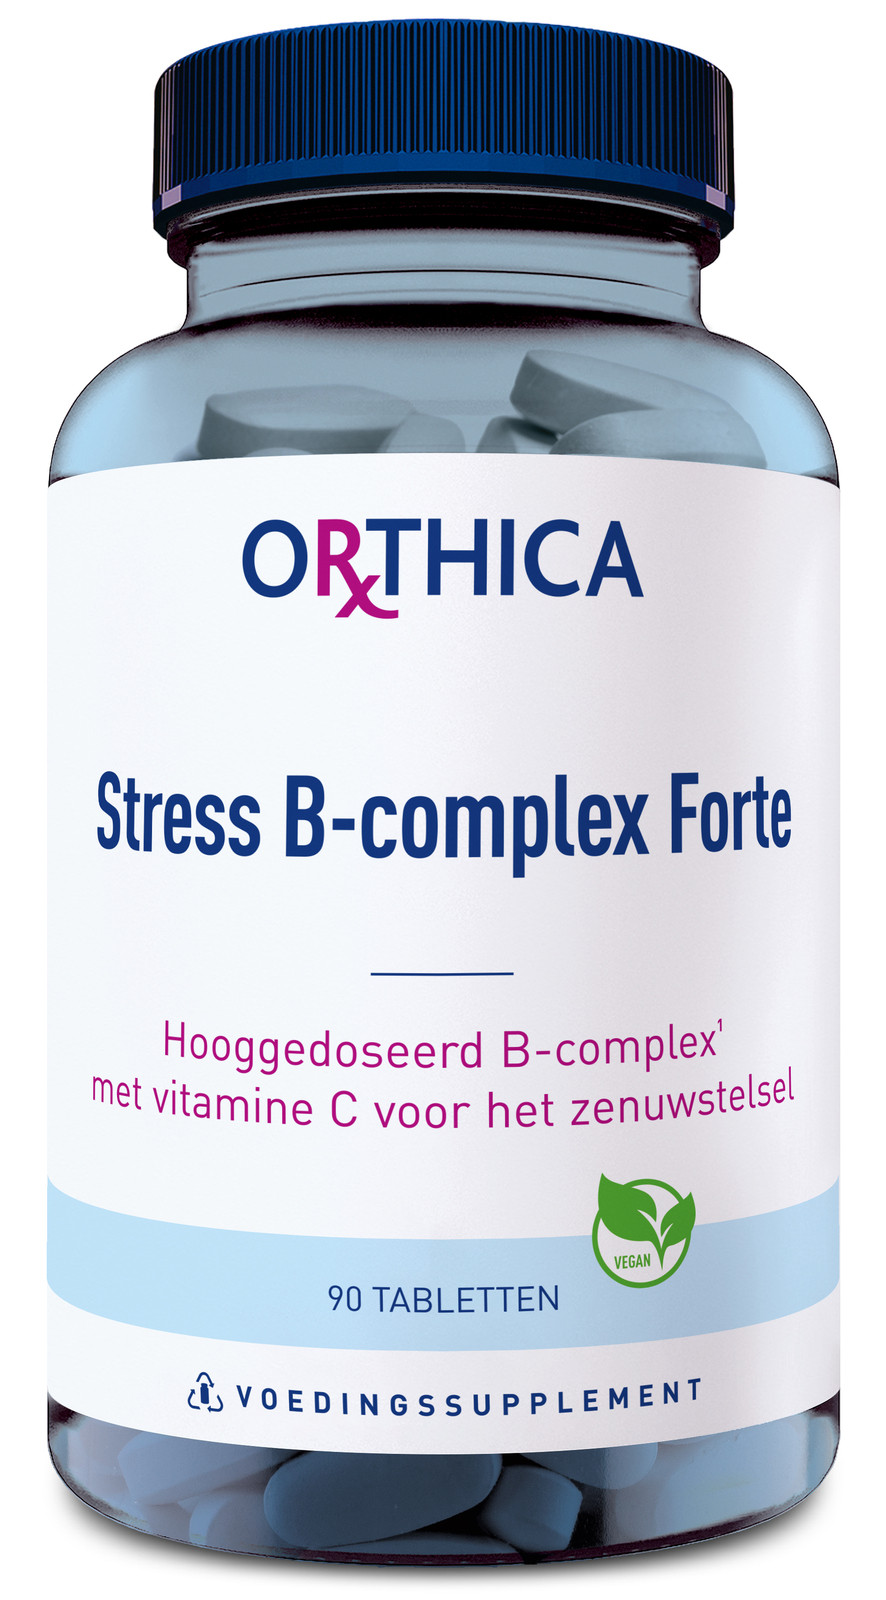 Orthica Stress B-complex Forte Tabletten